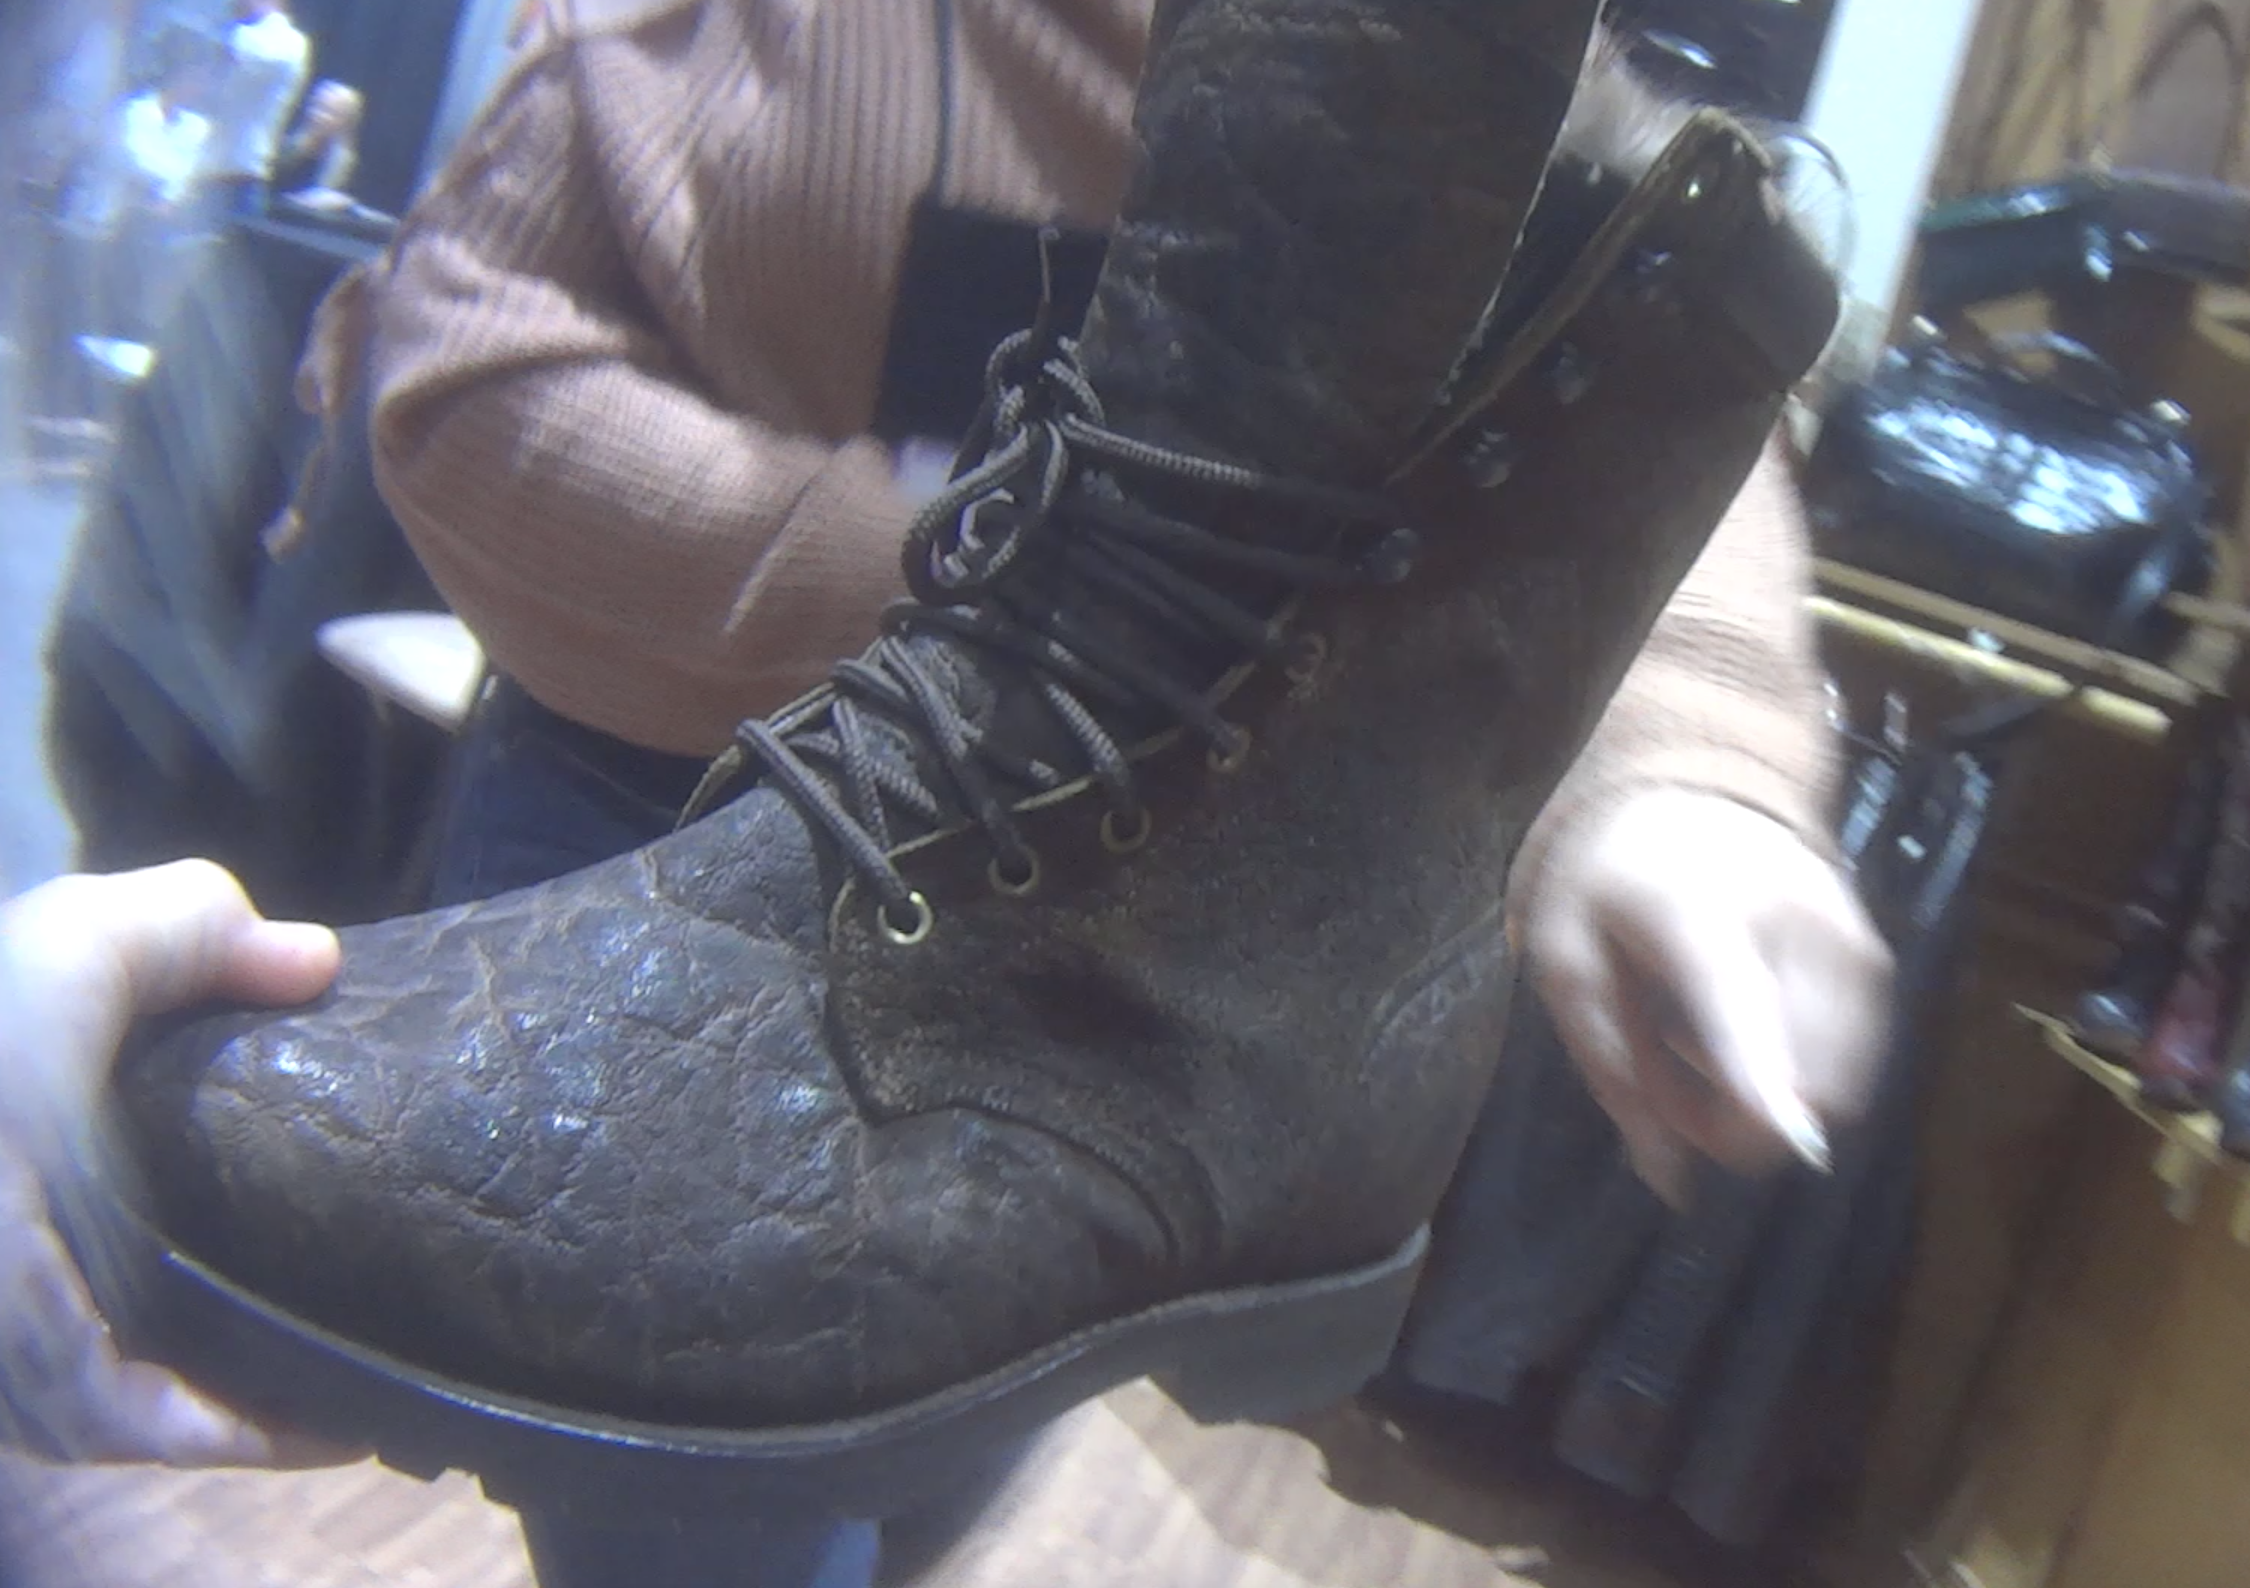 A boot sample made from elephant skin is displayed for custom ordering